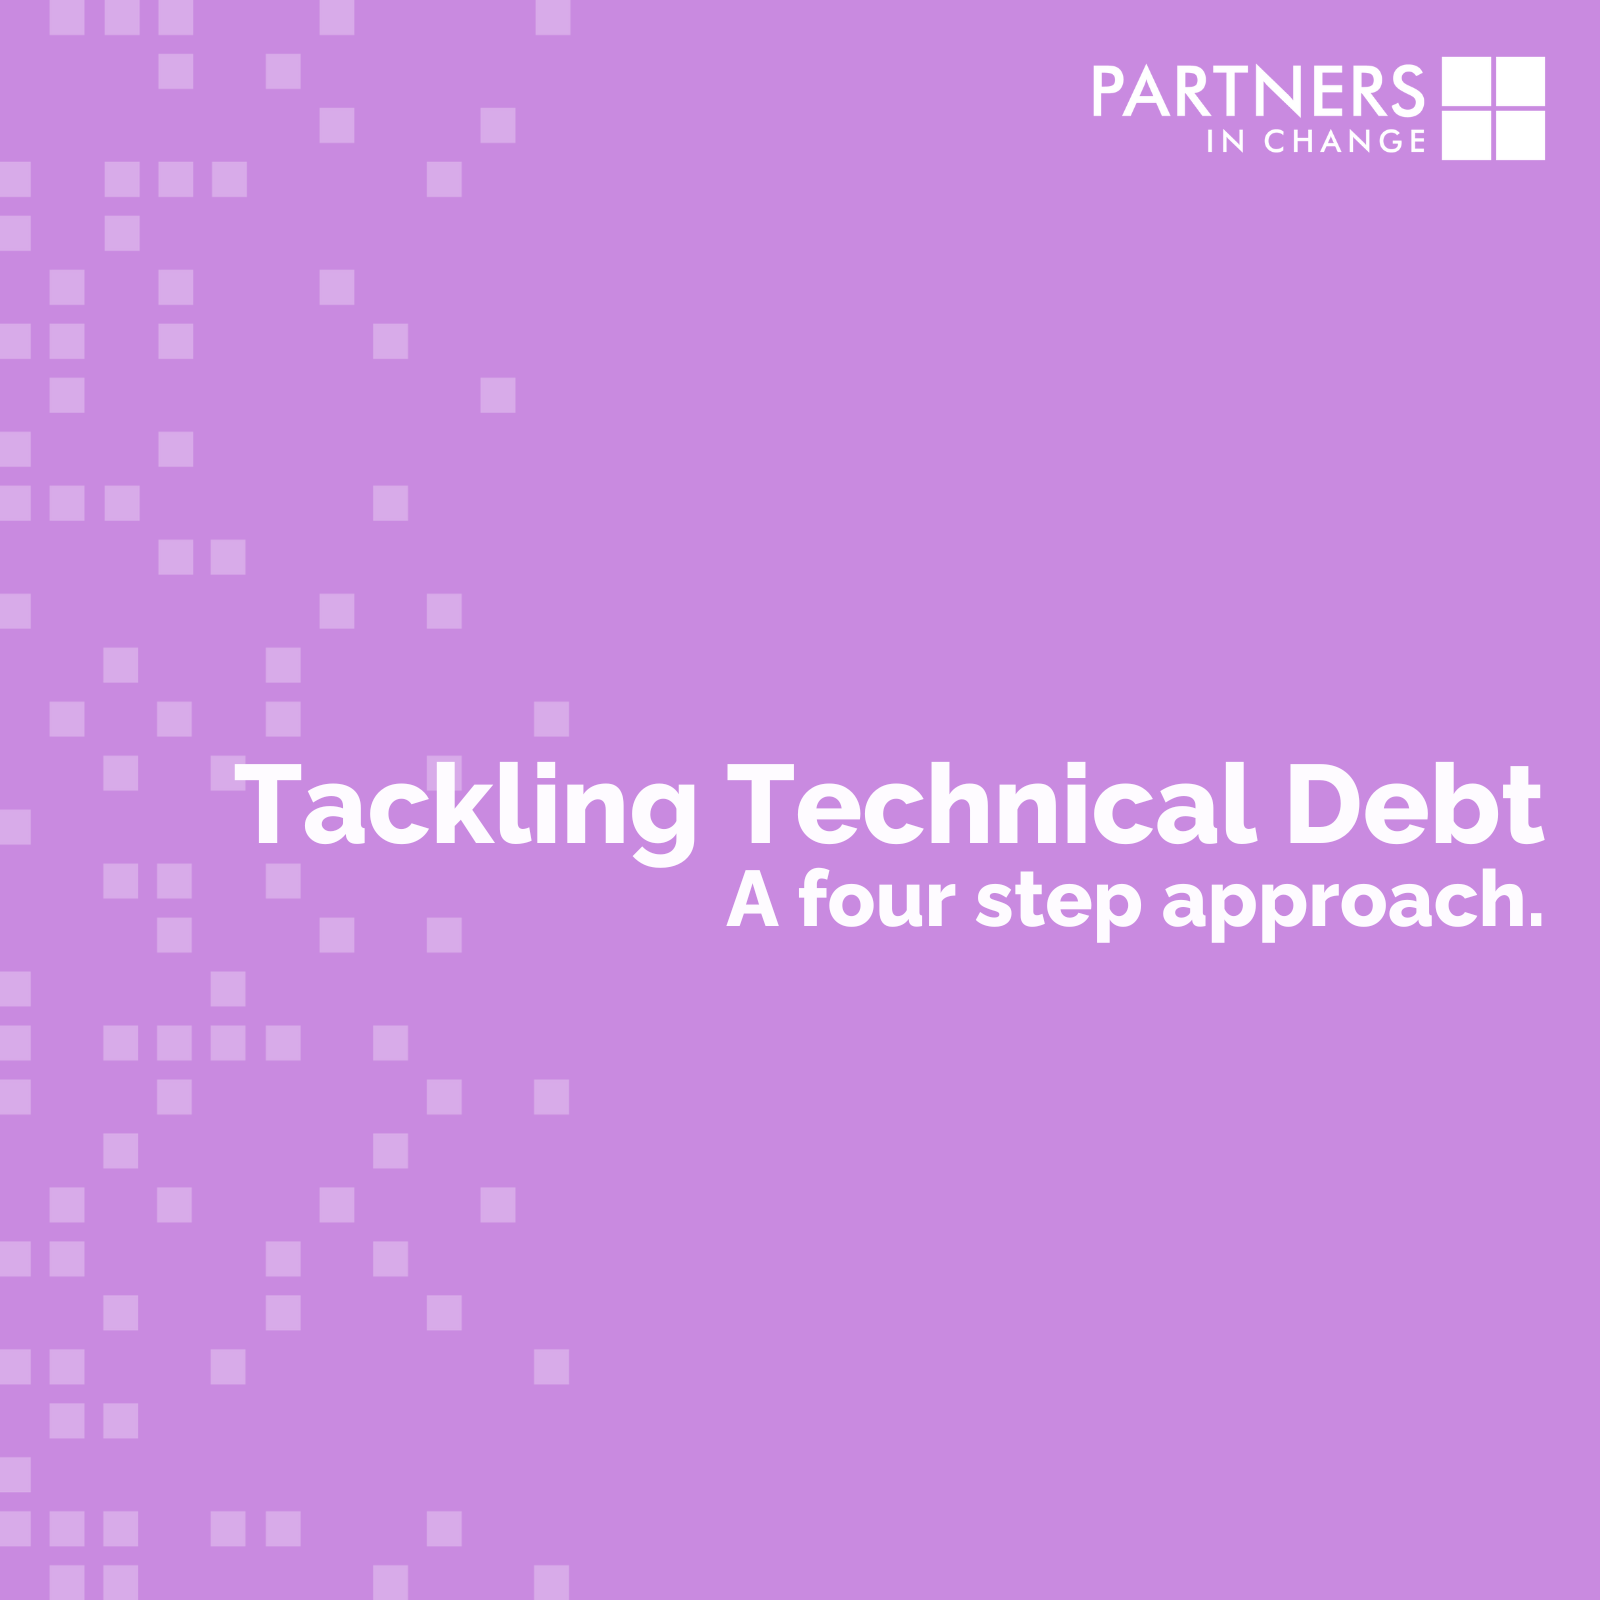 Tackling Legacy Technical Debt - a Four Step Approach